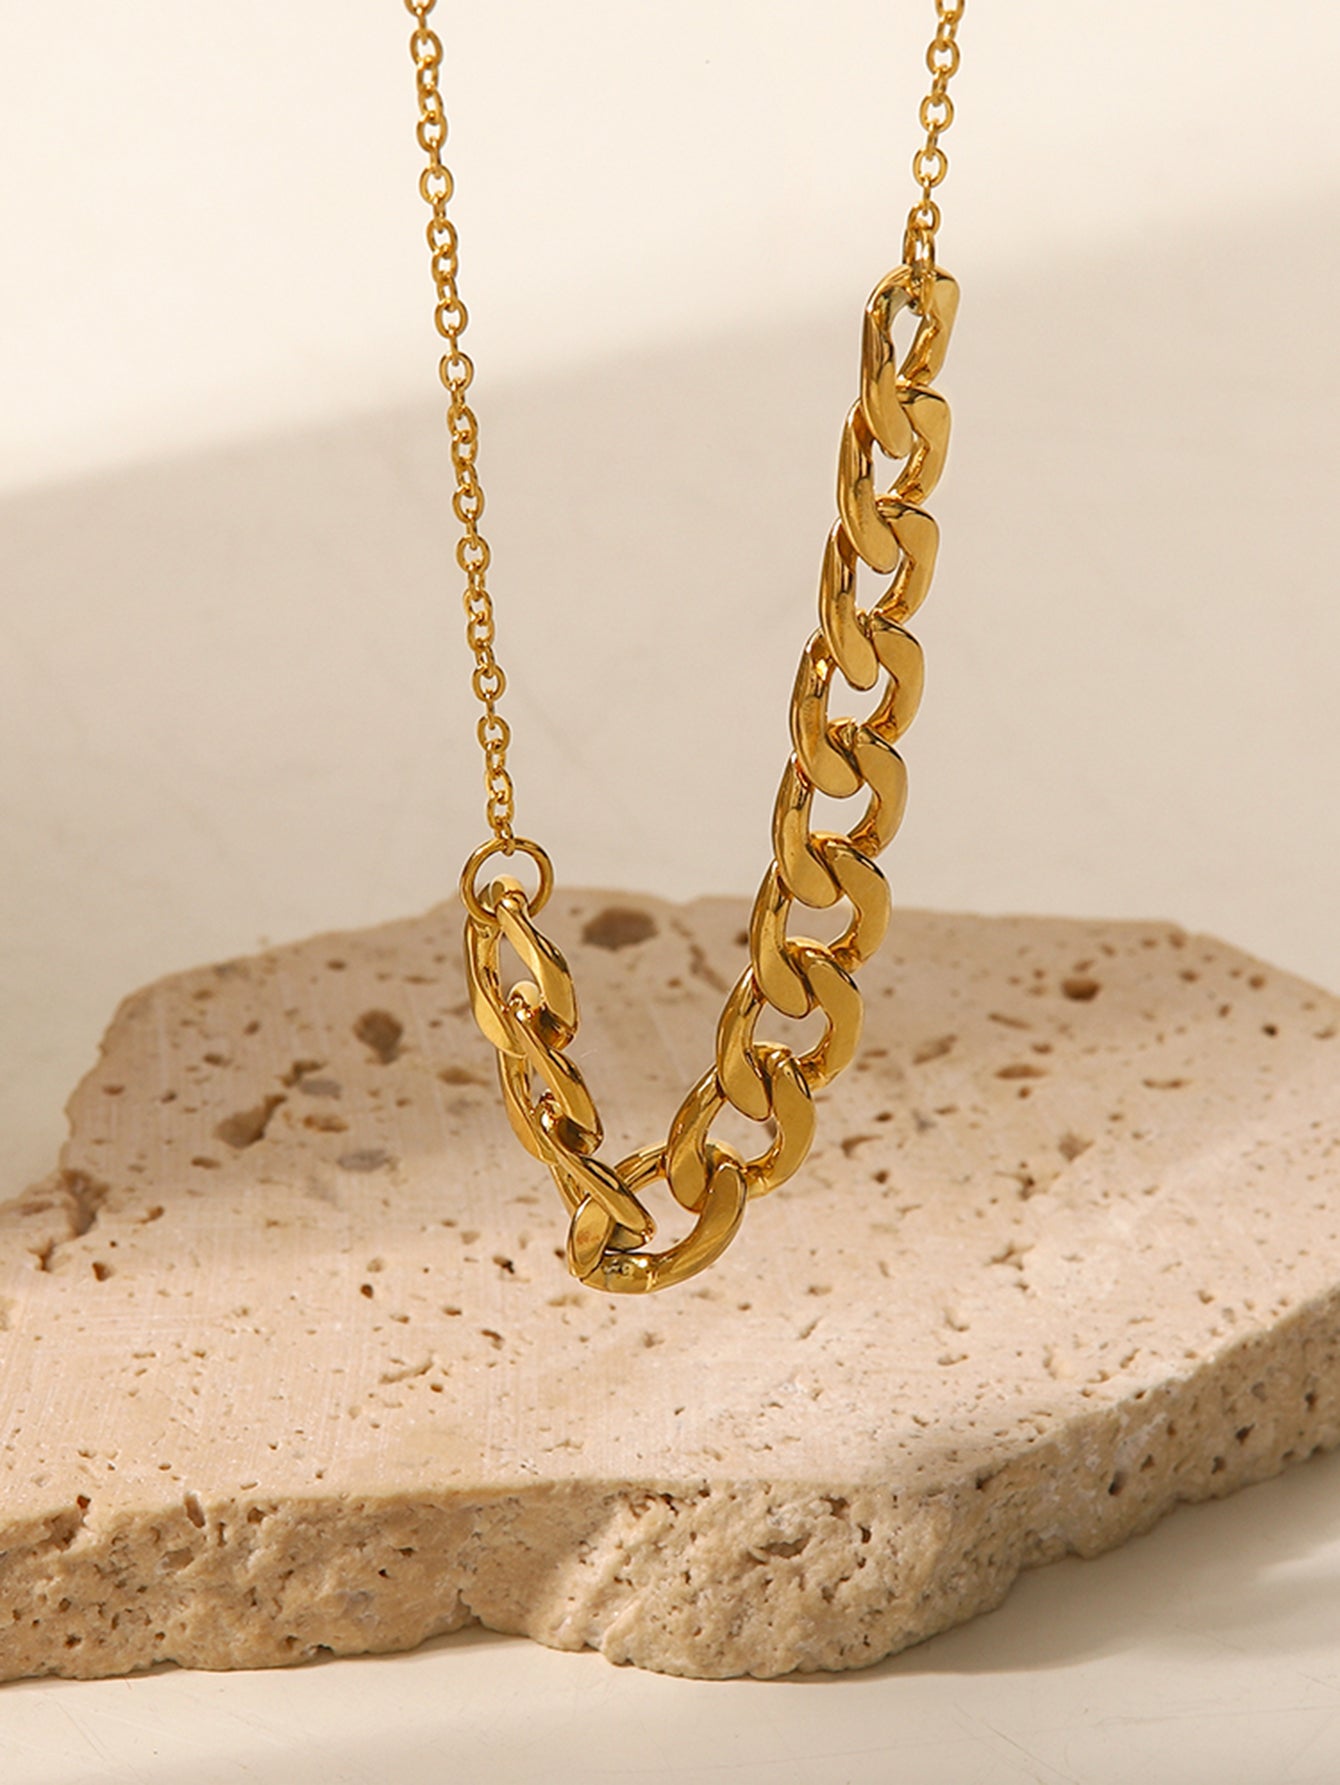 Gold Link Chain Necklace Stainless Steel Non Tarnish Unbranded